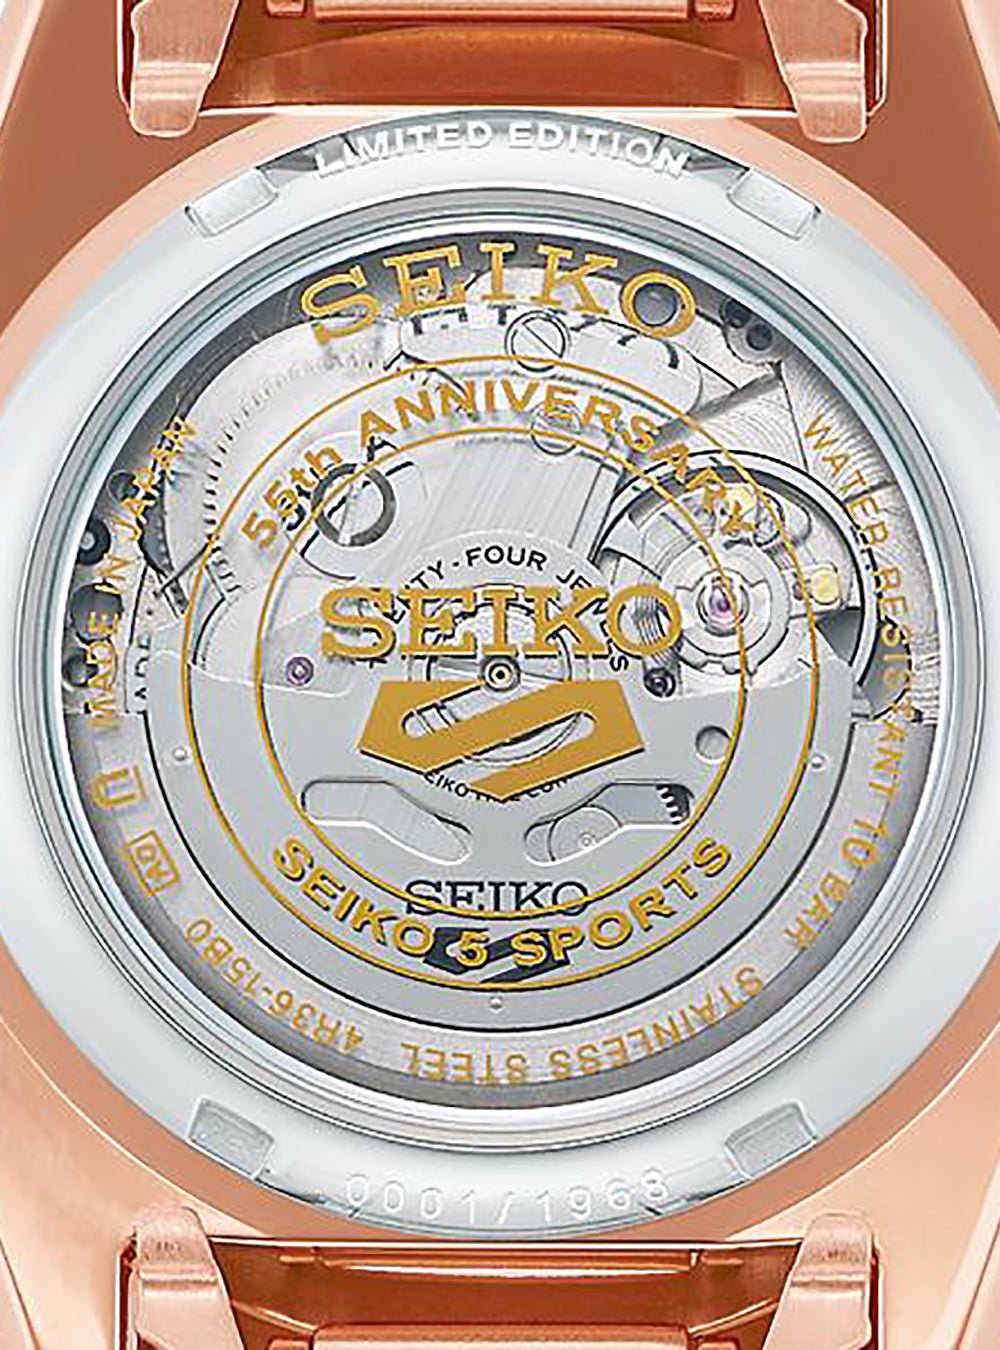 SEIKO 5 SPORTS SKX SPORTS STYLE 55TH ANNIVERSARY CUSTOMIZE CAMPAIGN LIMITED  EDITION SBSA216 MADE IN JAPAN JDM